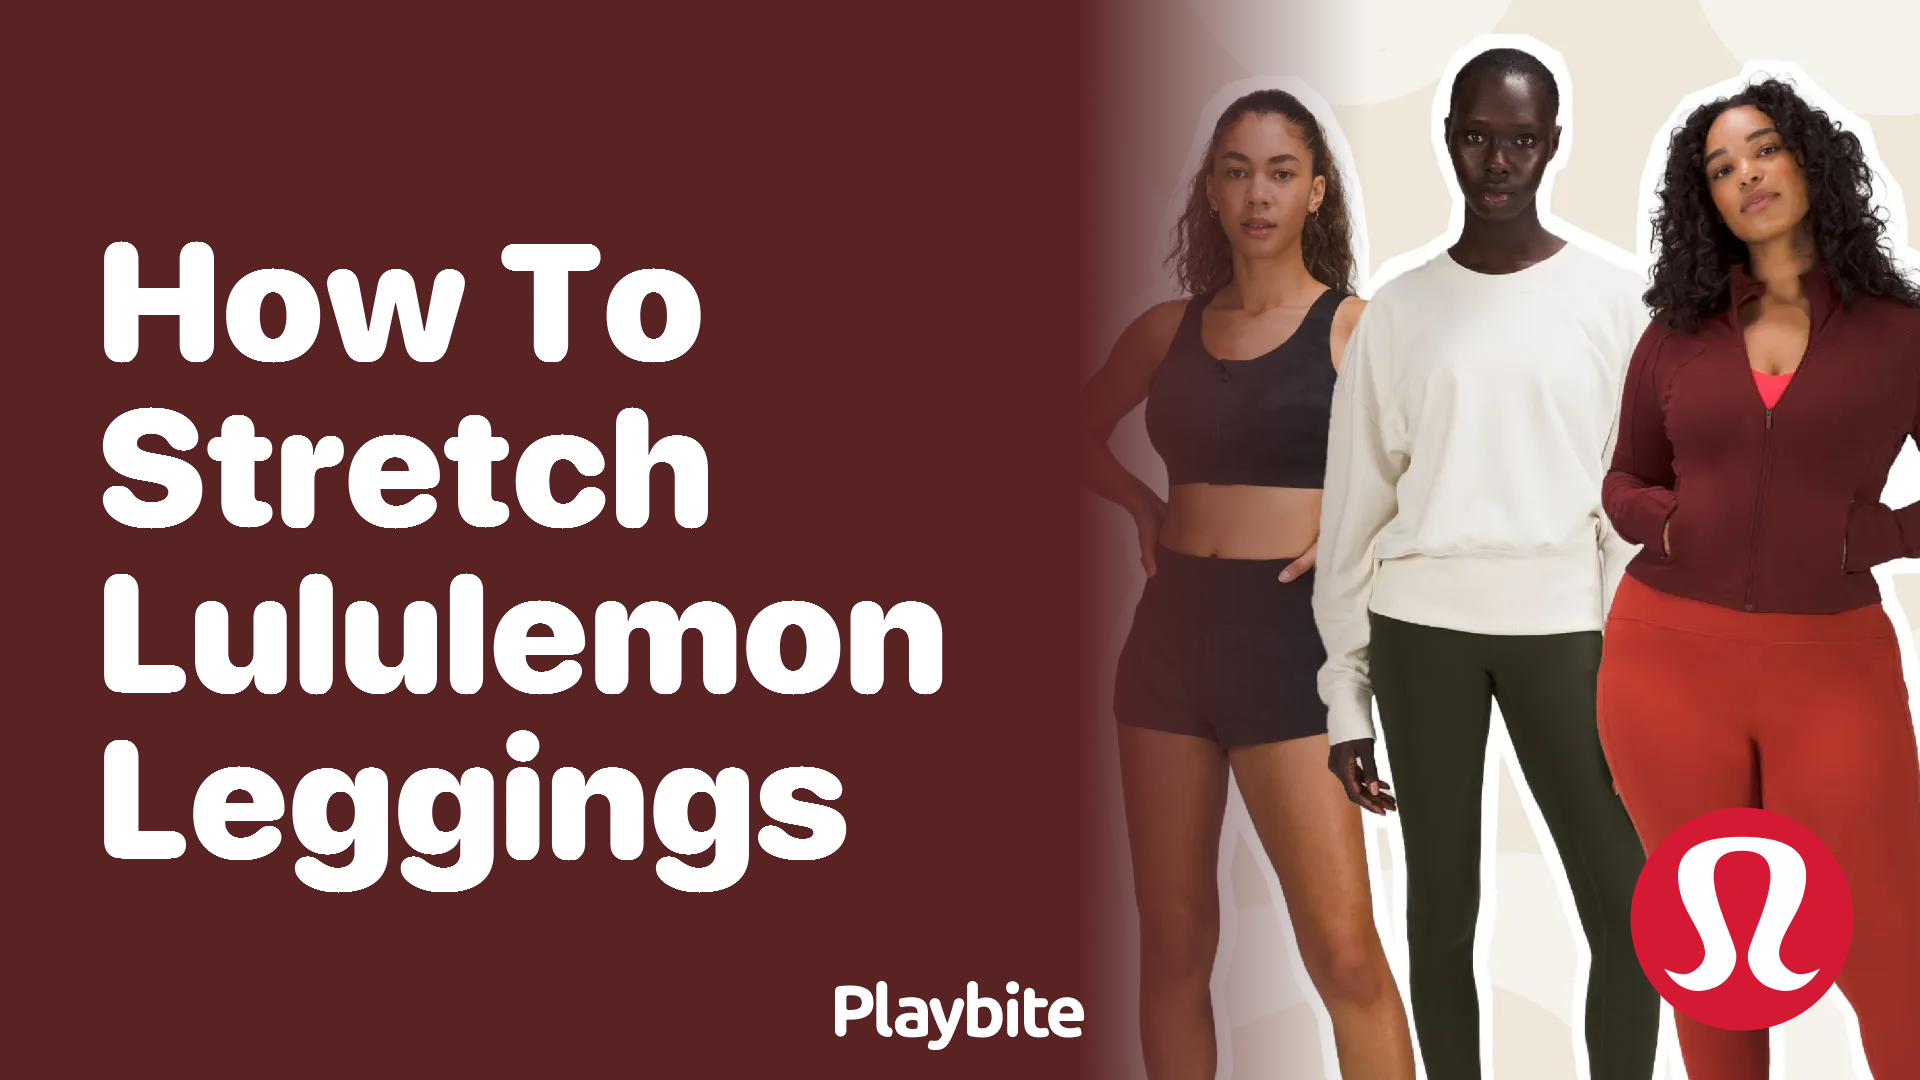 How to Stretch Lululemon Leggings: A Simple Guide - Playbite